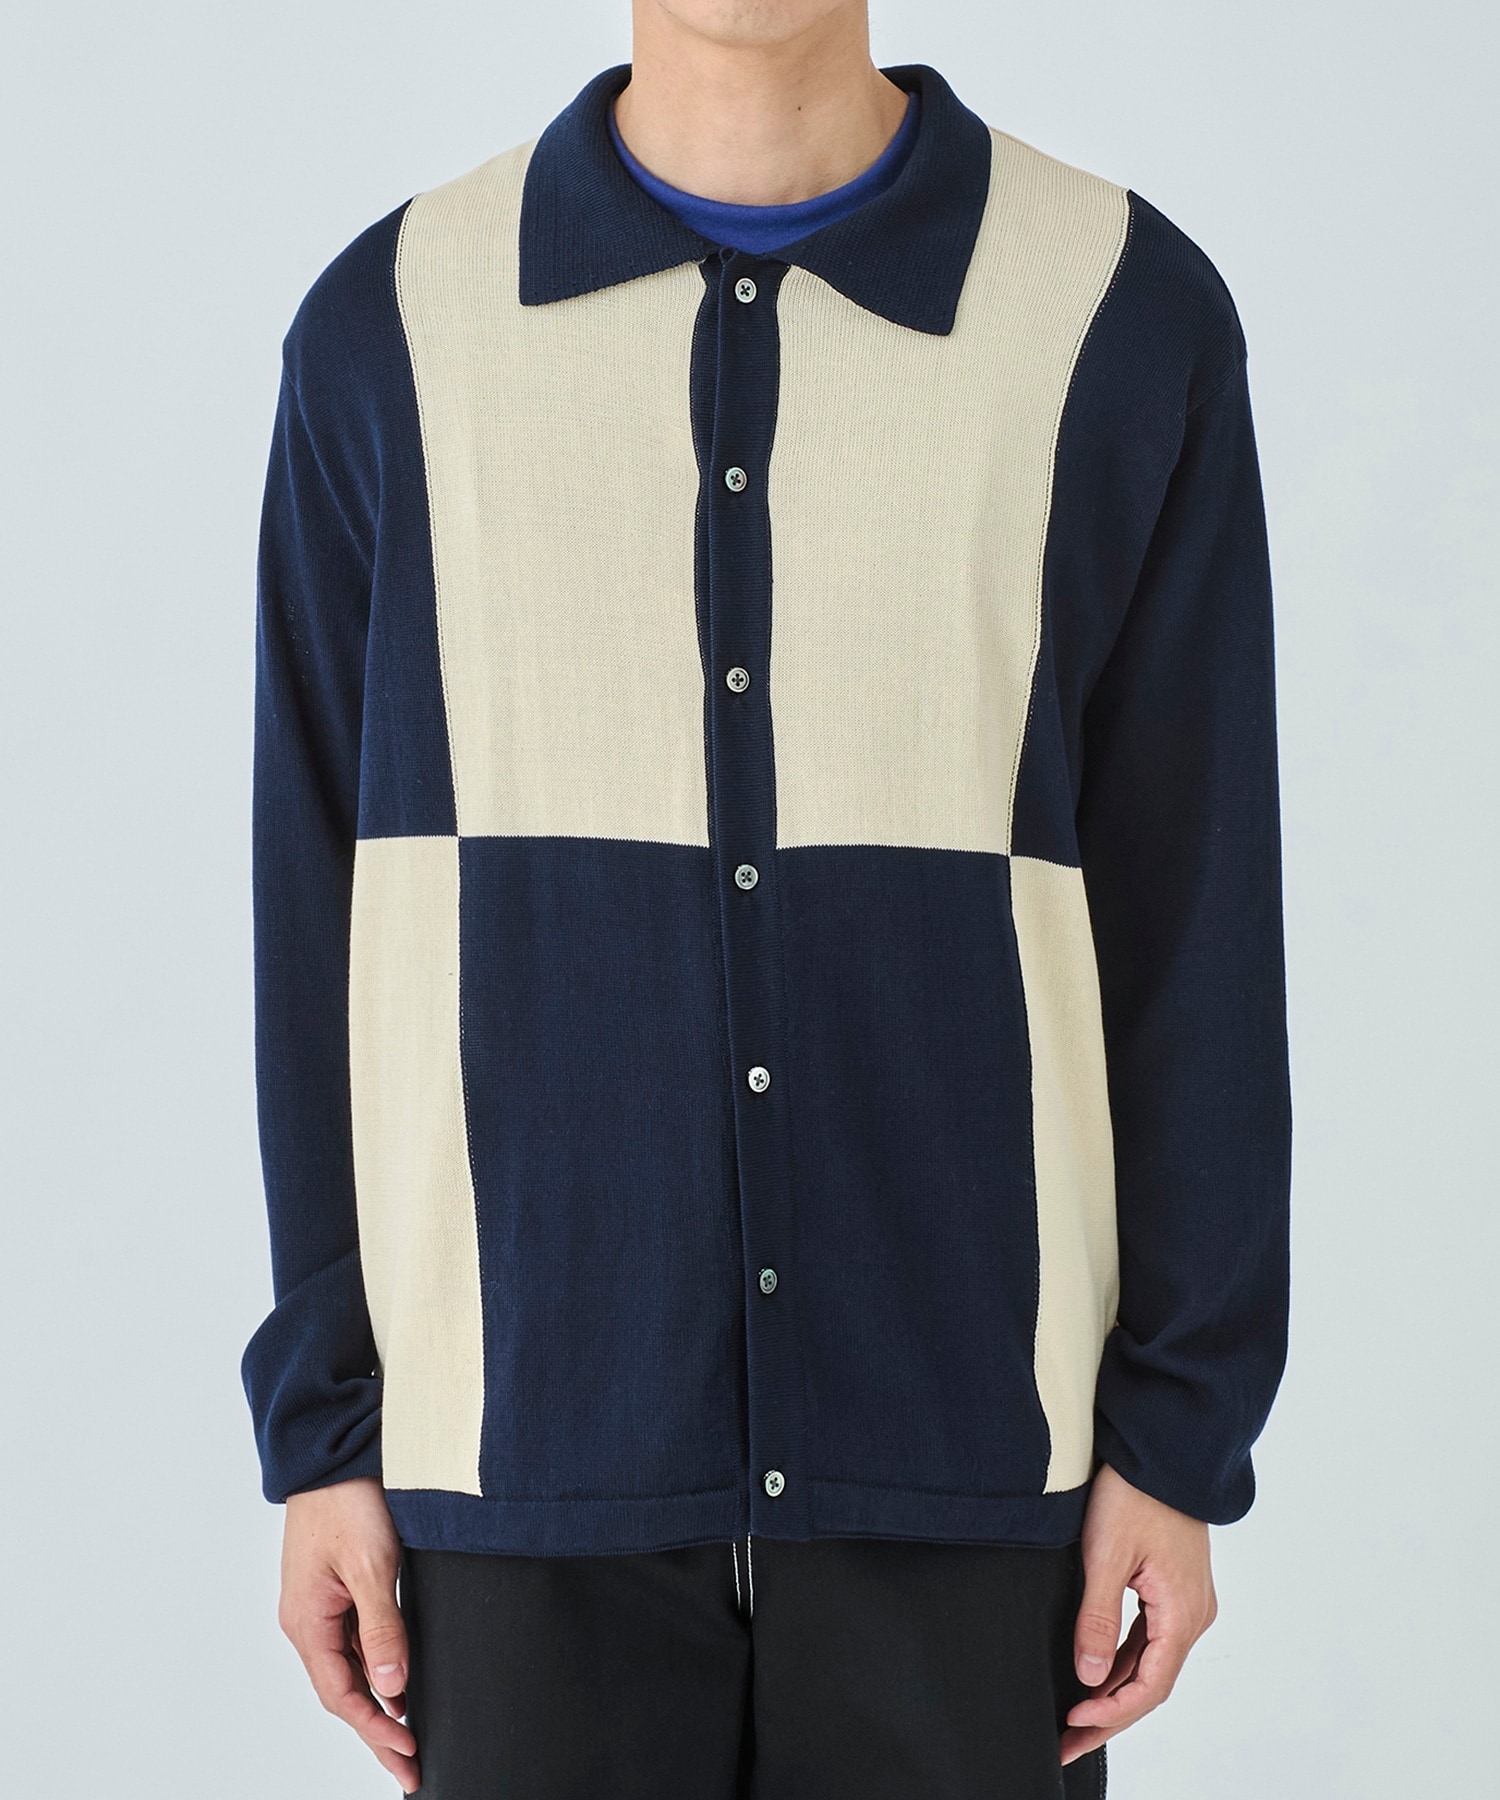 ALL BLUES BUTTON UP SWEATER Name.